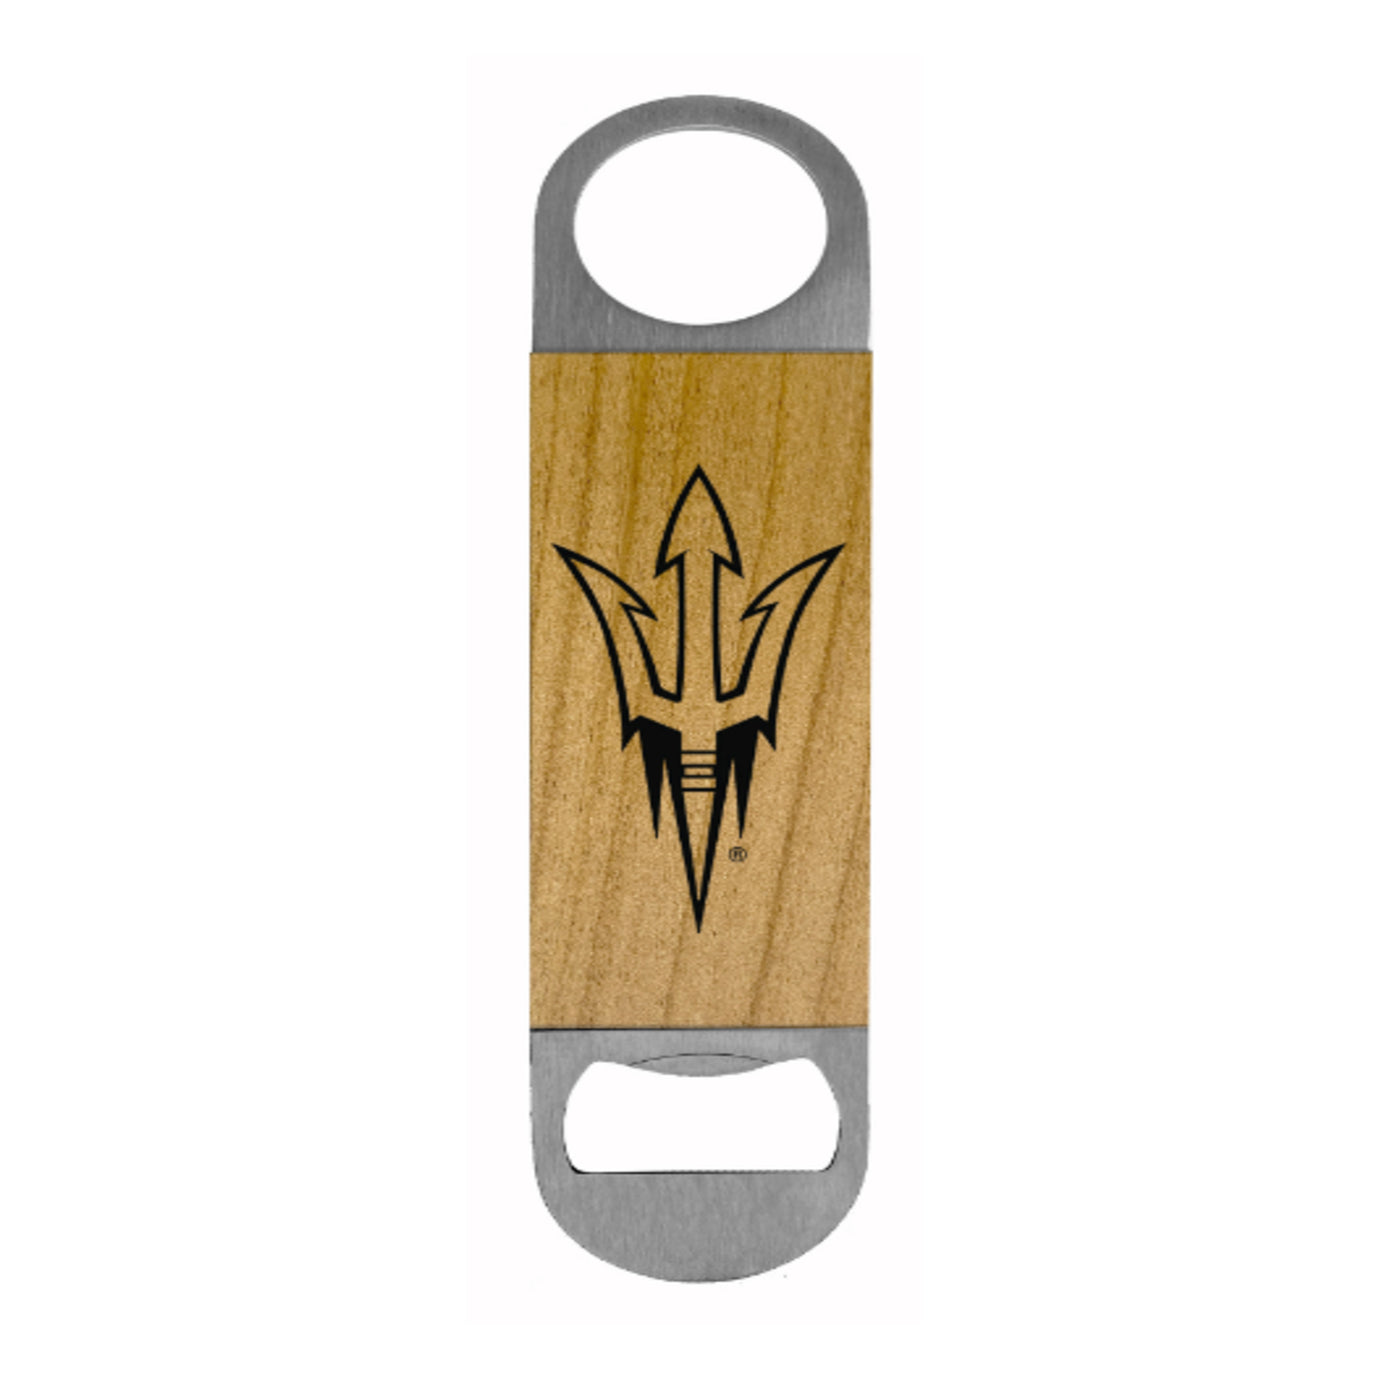 ASU metal bottle opener with a wooden center with a pitchfork image on the front